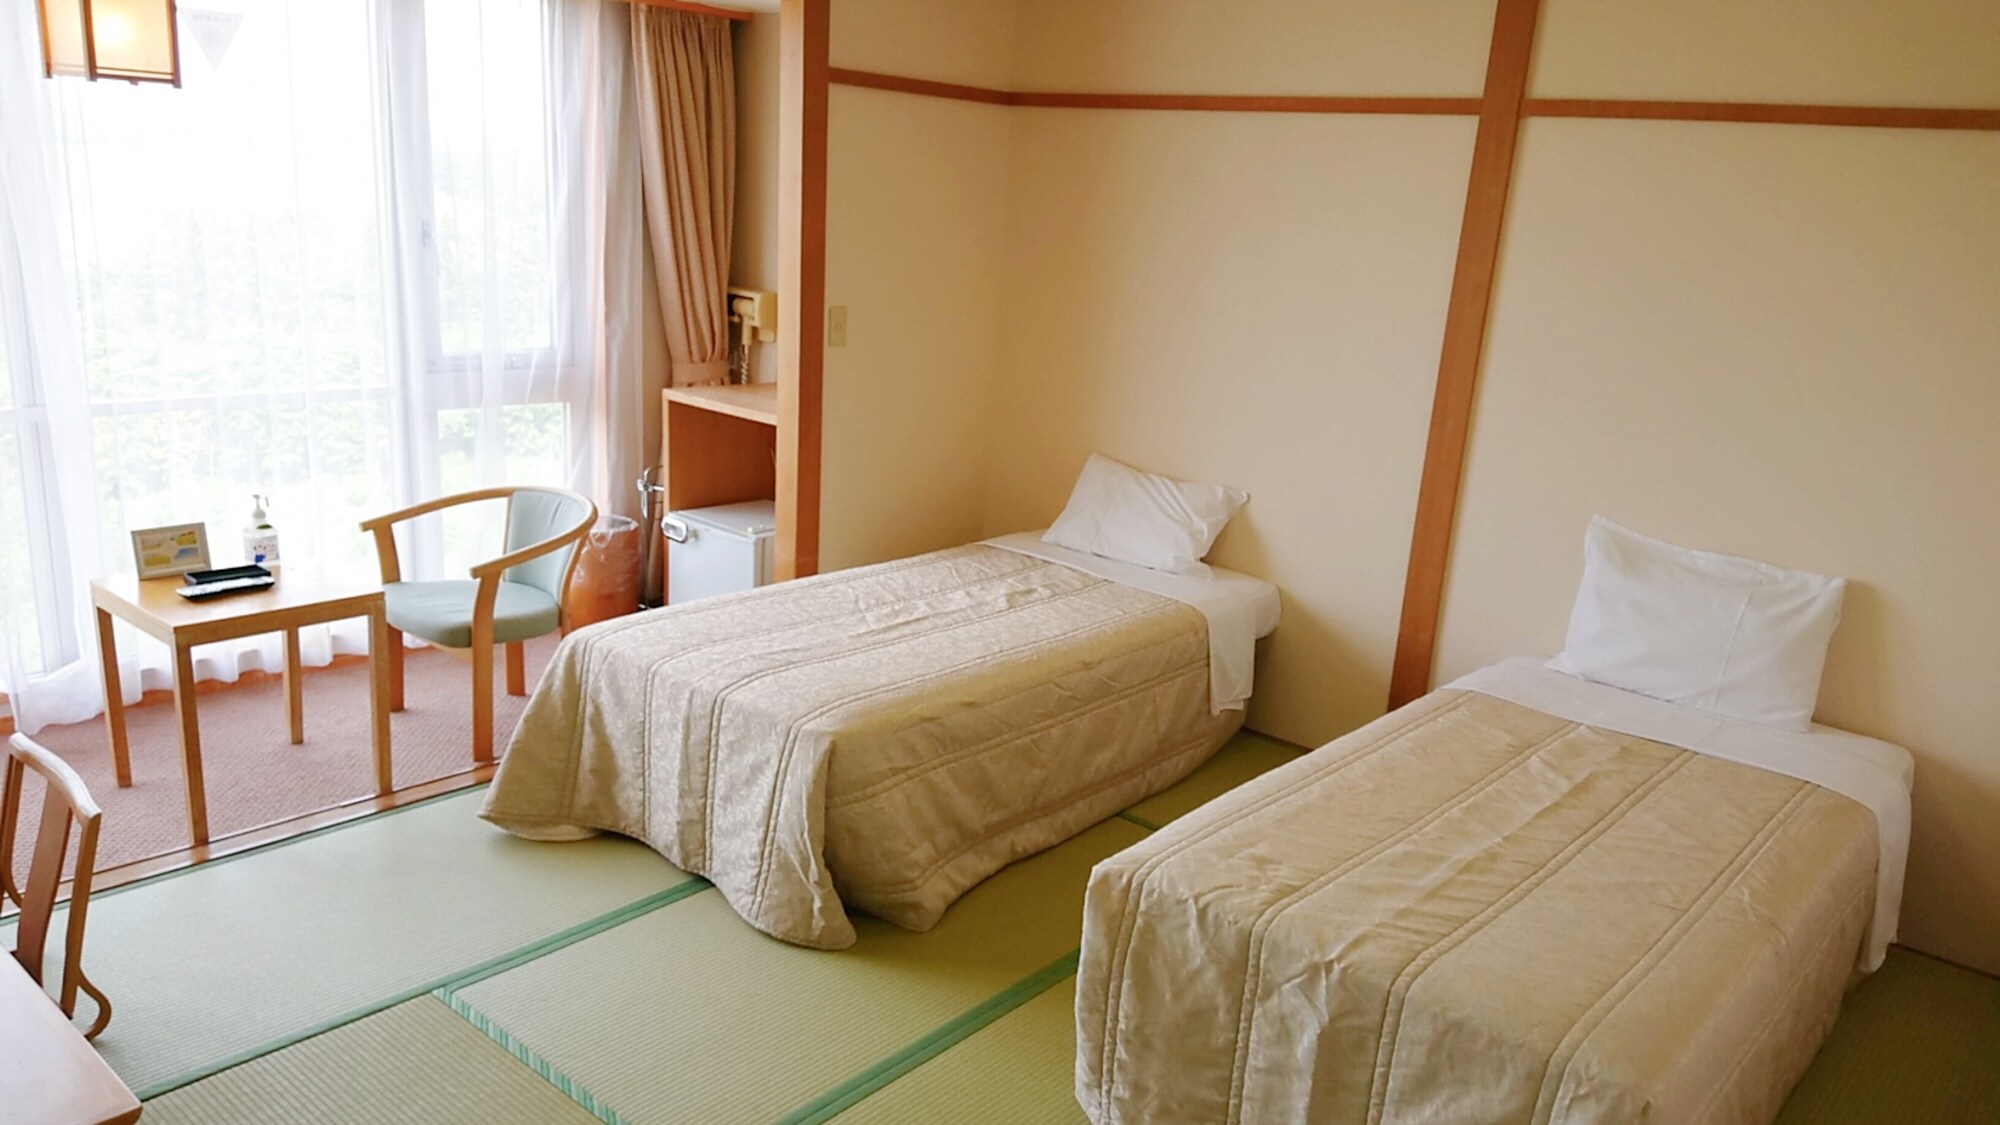 * Japanese-style bed / You can rest in bed while feeling the comfort of the Japanese-style room.